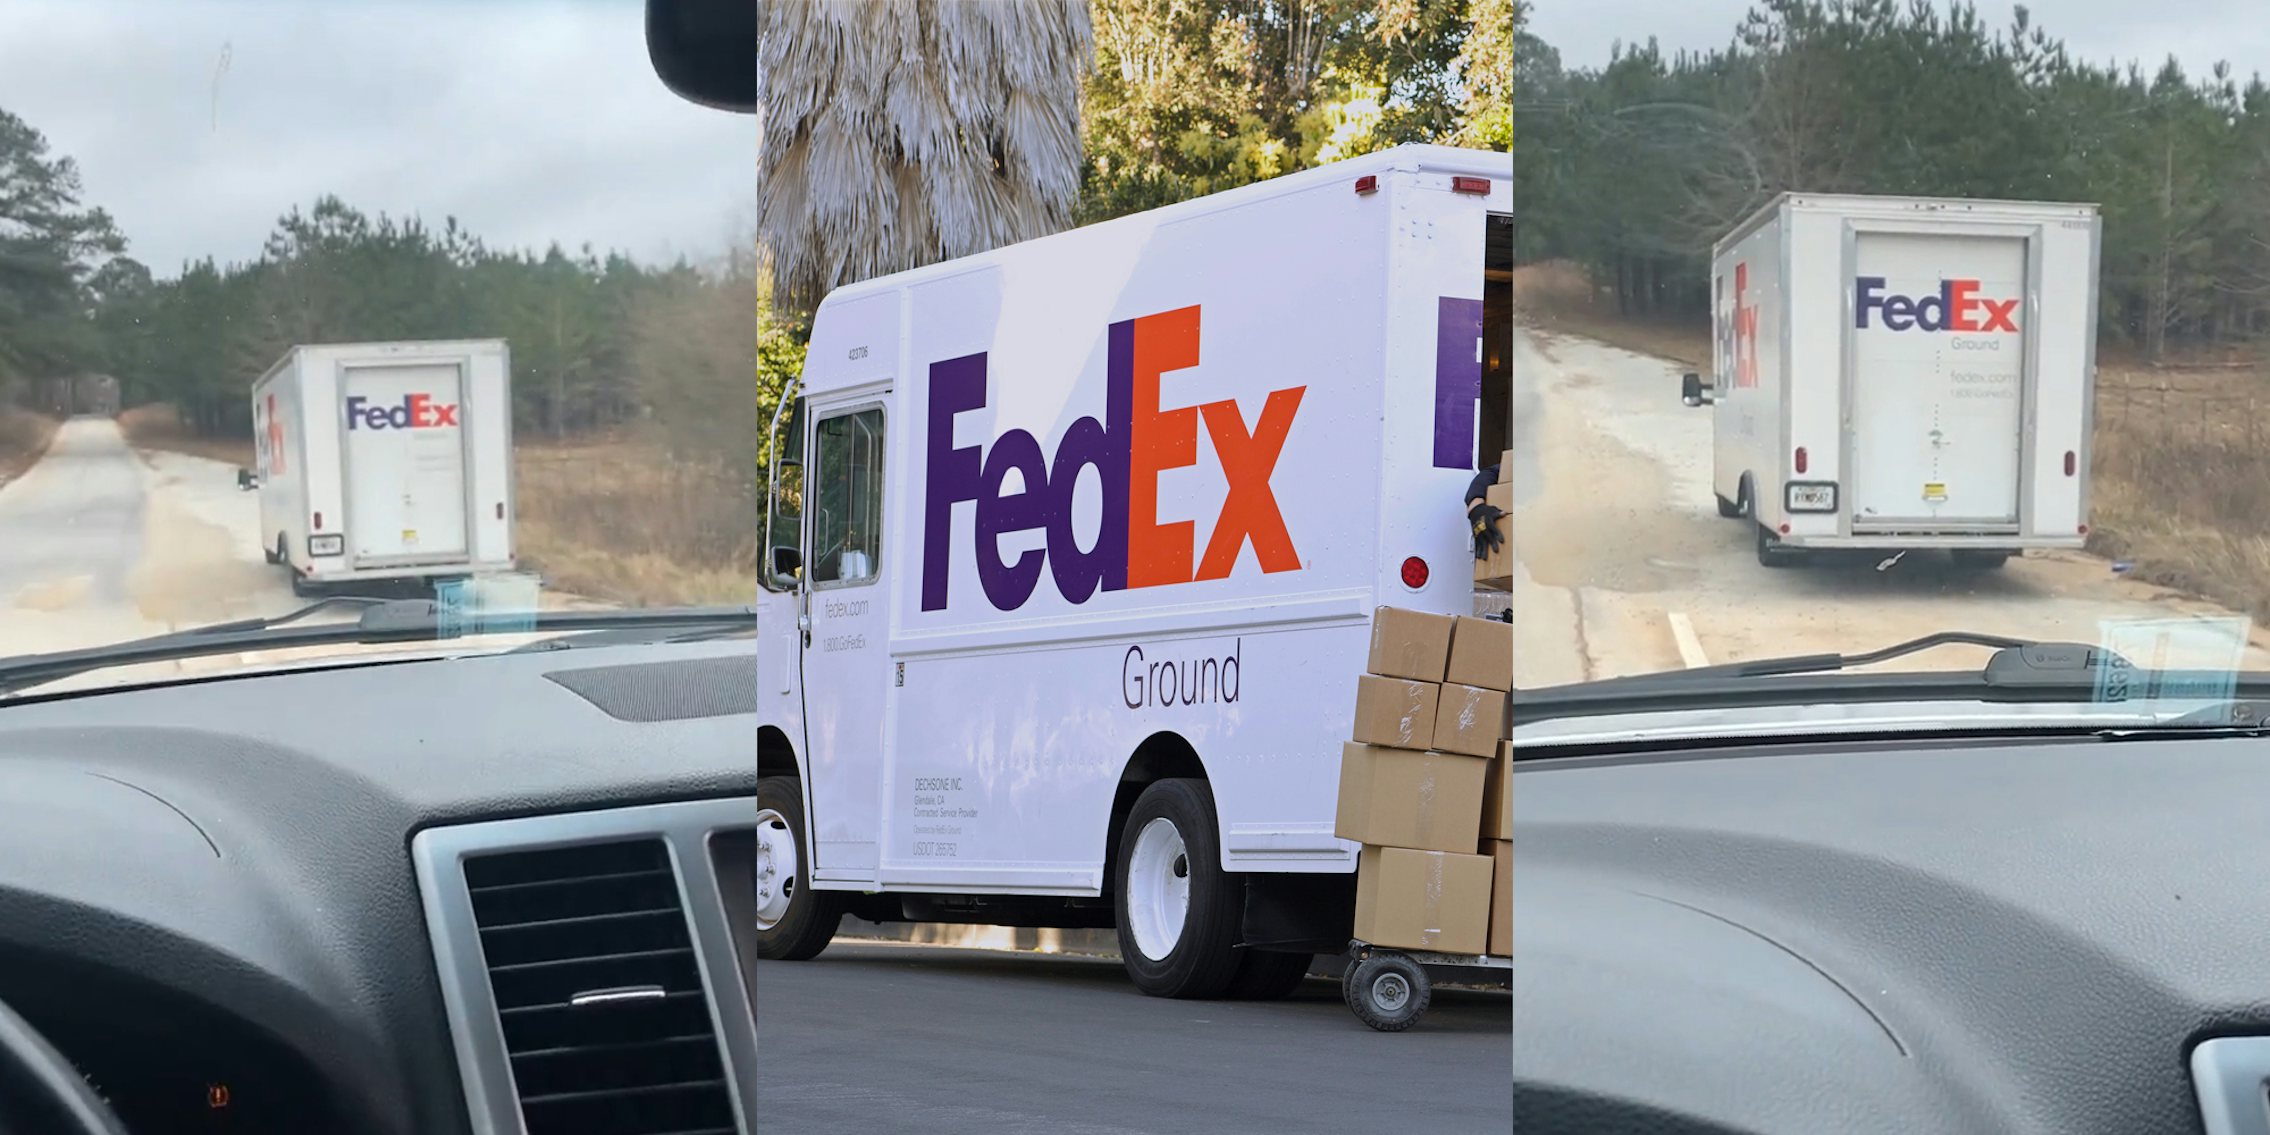 FedEx truck on side of road seen from windshield of car (l) FedEx truck with boxes (c) FedEx truck on side of road seen from windshield of car (r)